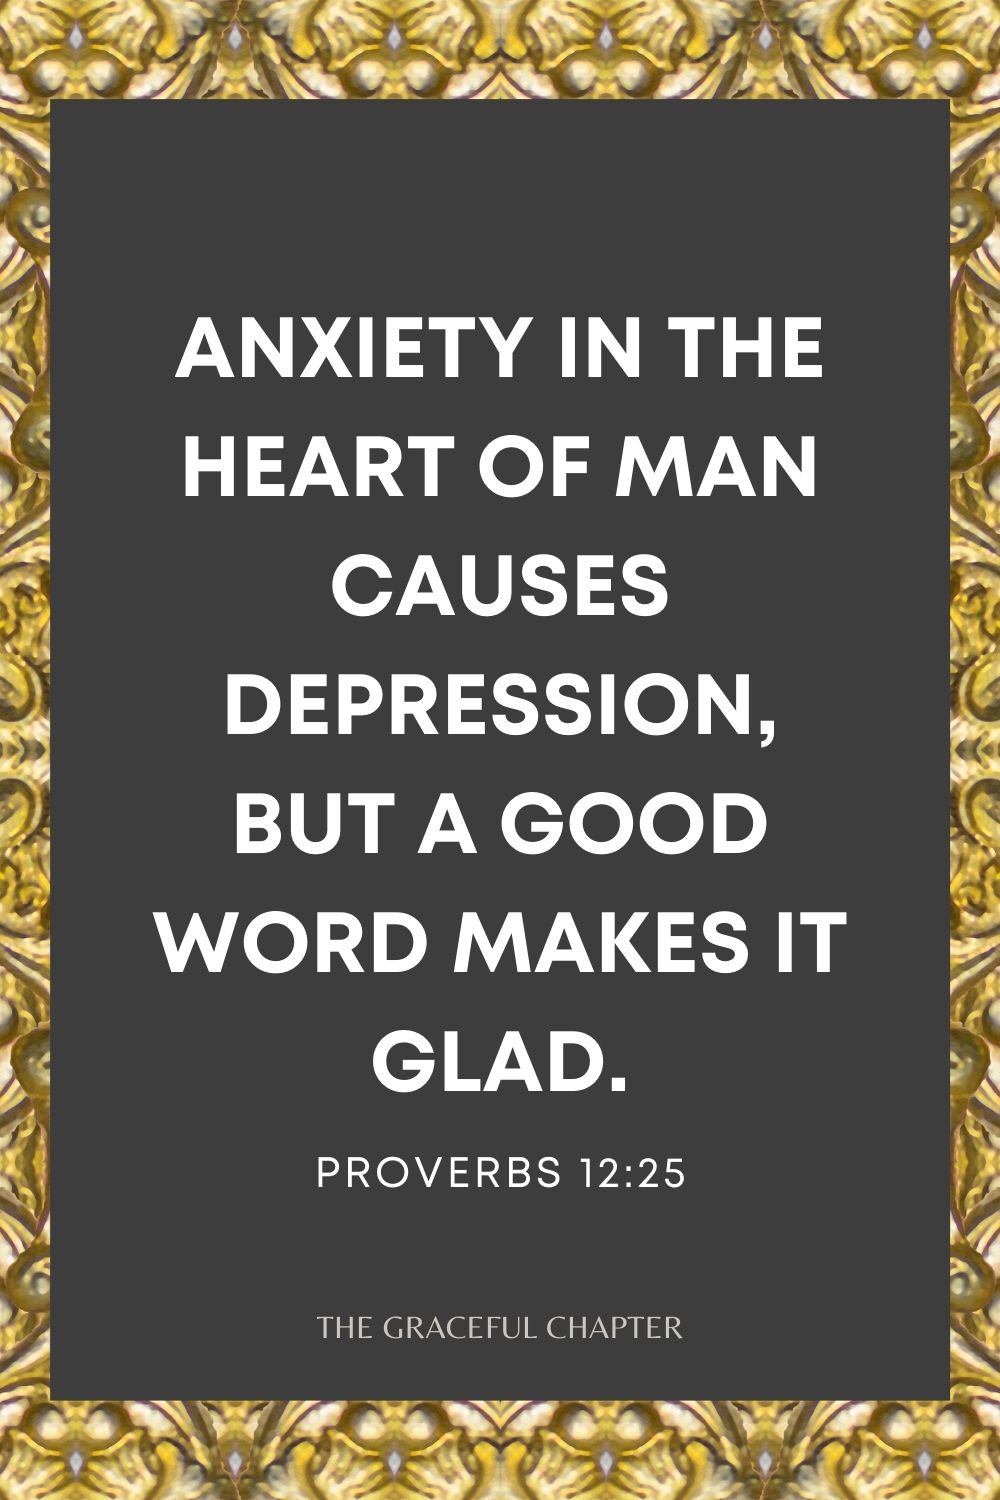 Anxiety in the heart of man causes depression, But a good word makes it glad. Proverbs 12:25